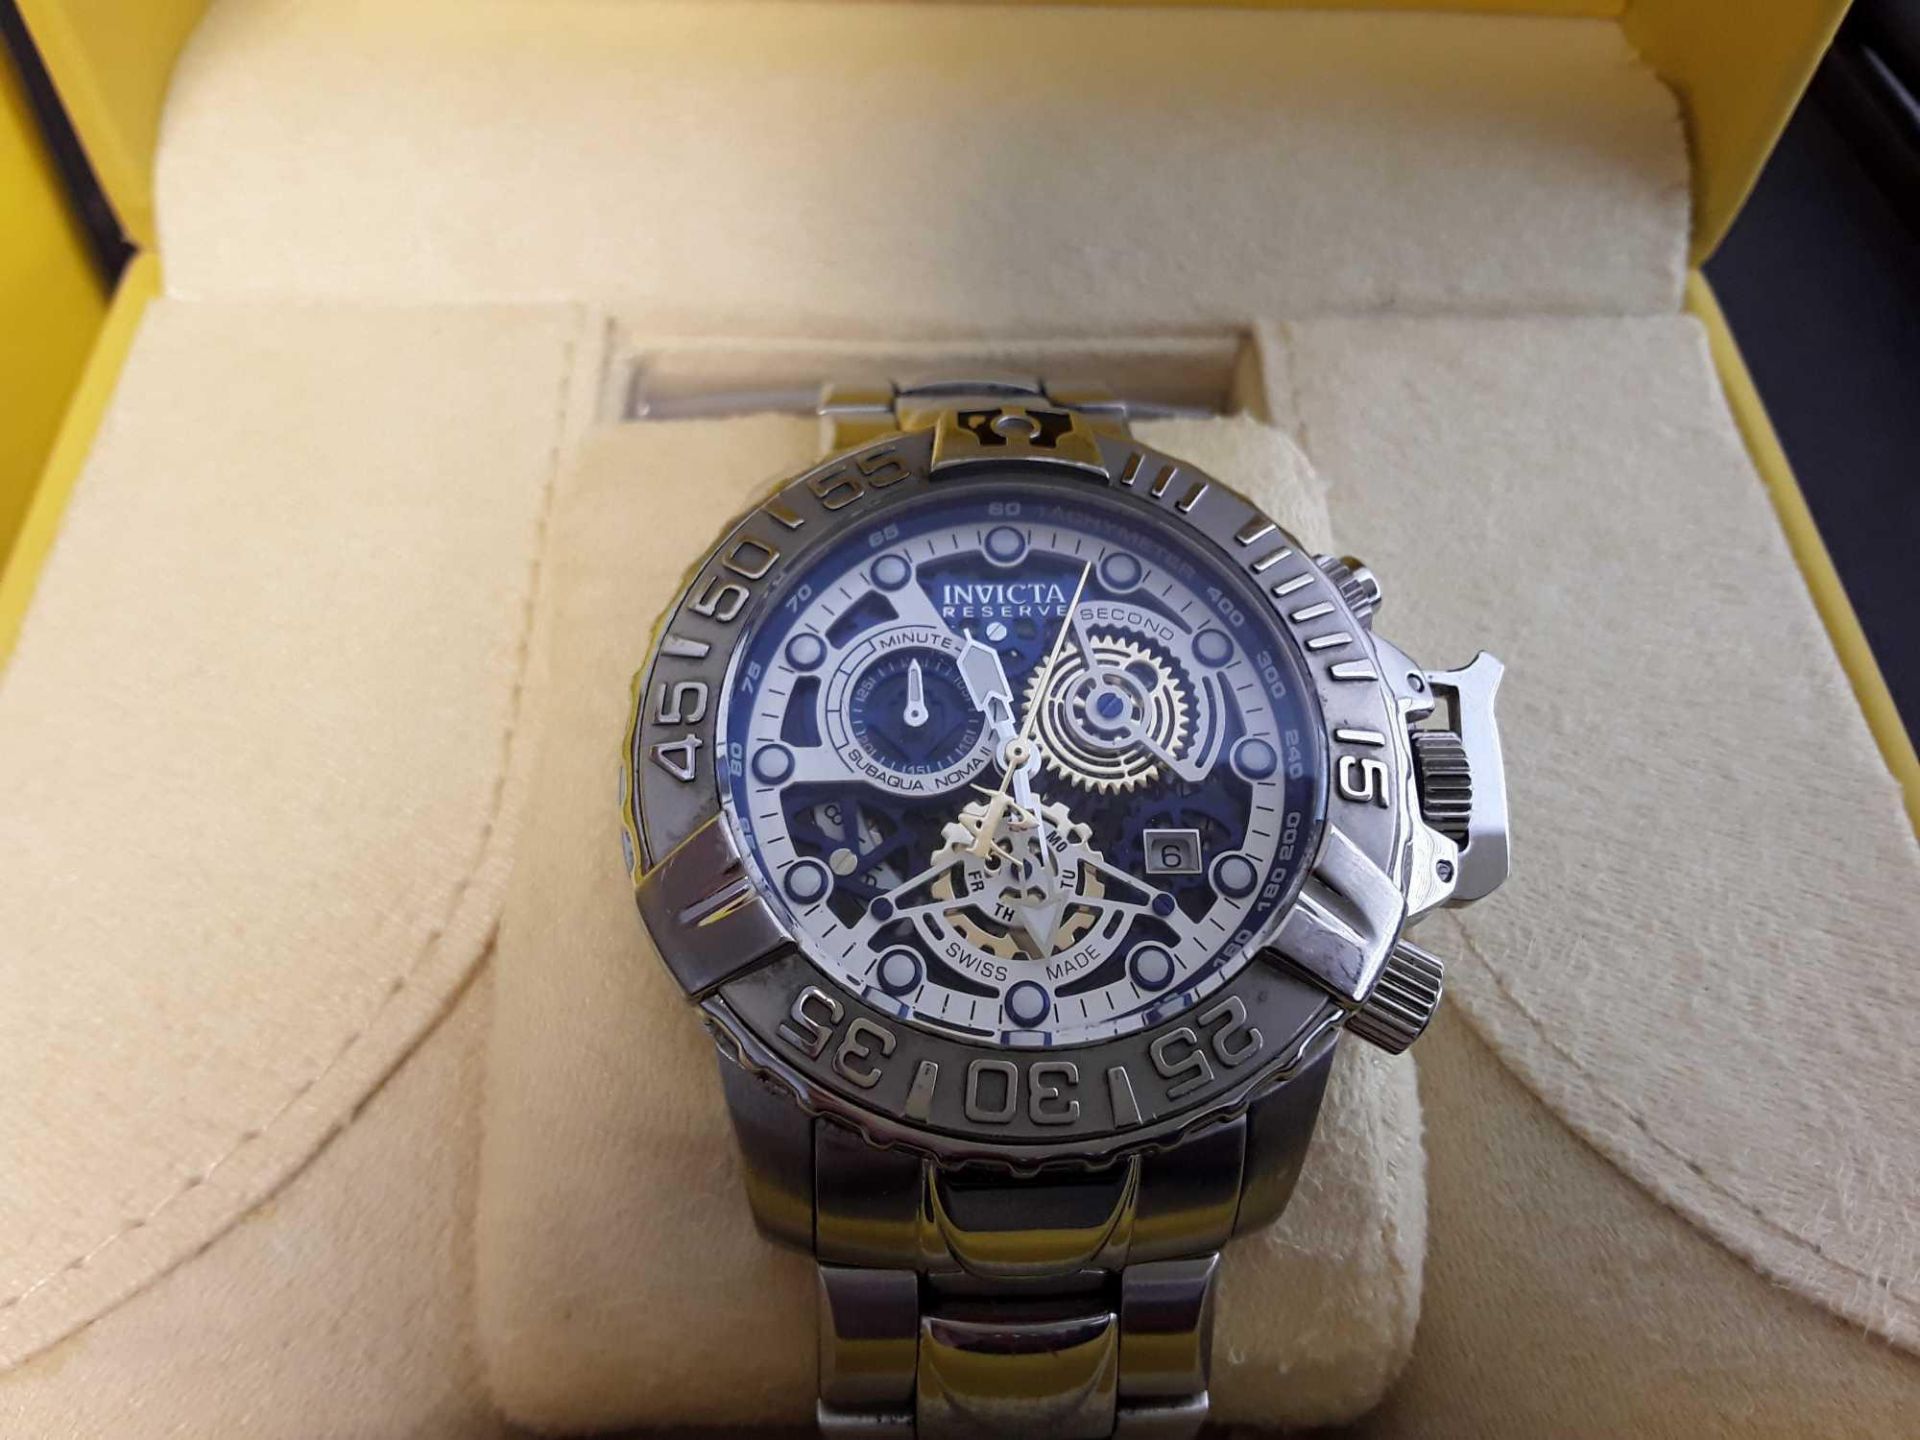 Invicta Divers Watch with Box and Case - Image 2 of 2